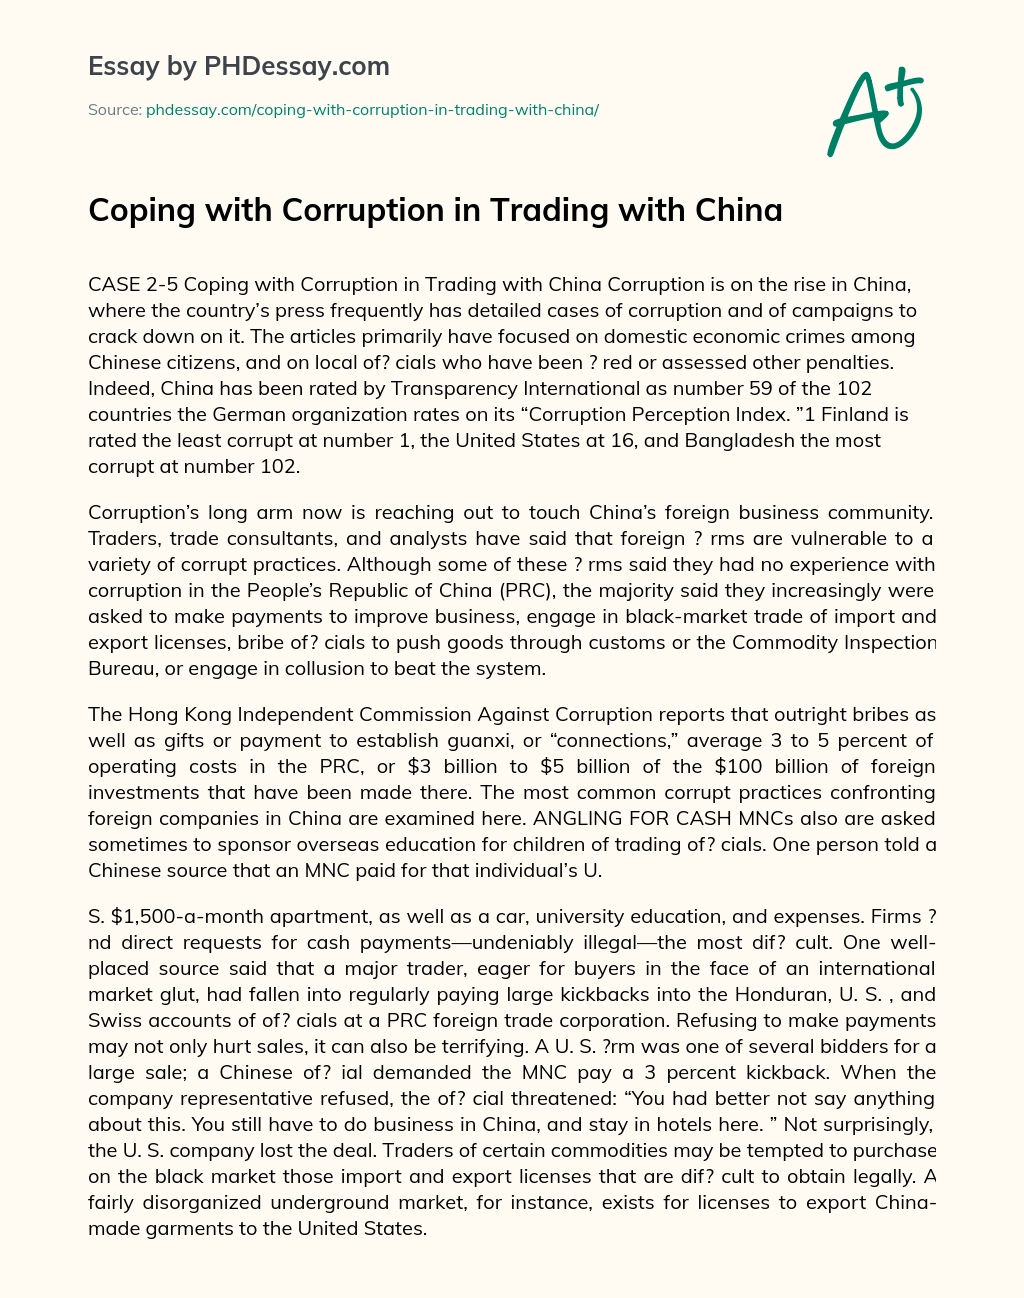 Coping with Corruption in Trading with China essay